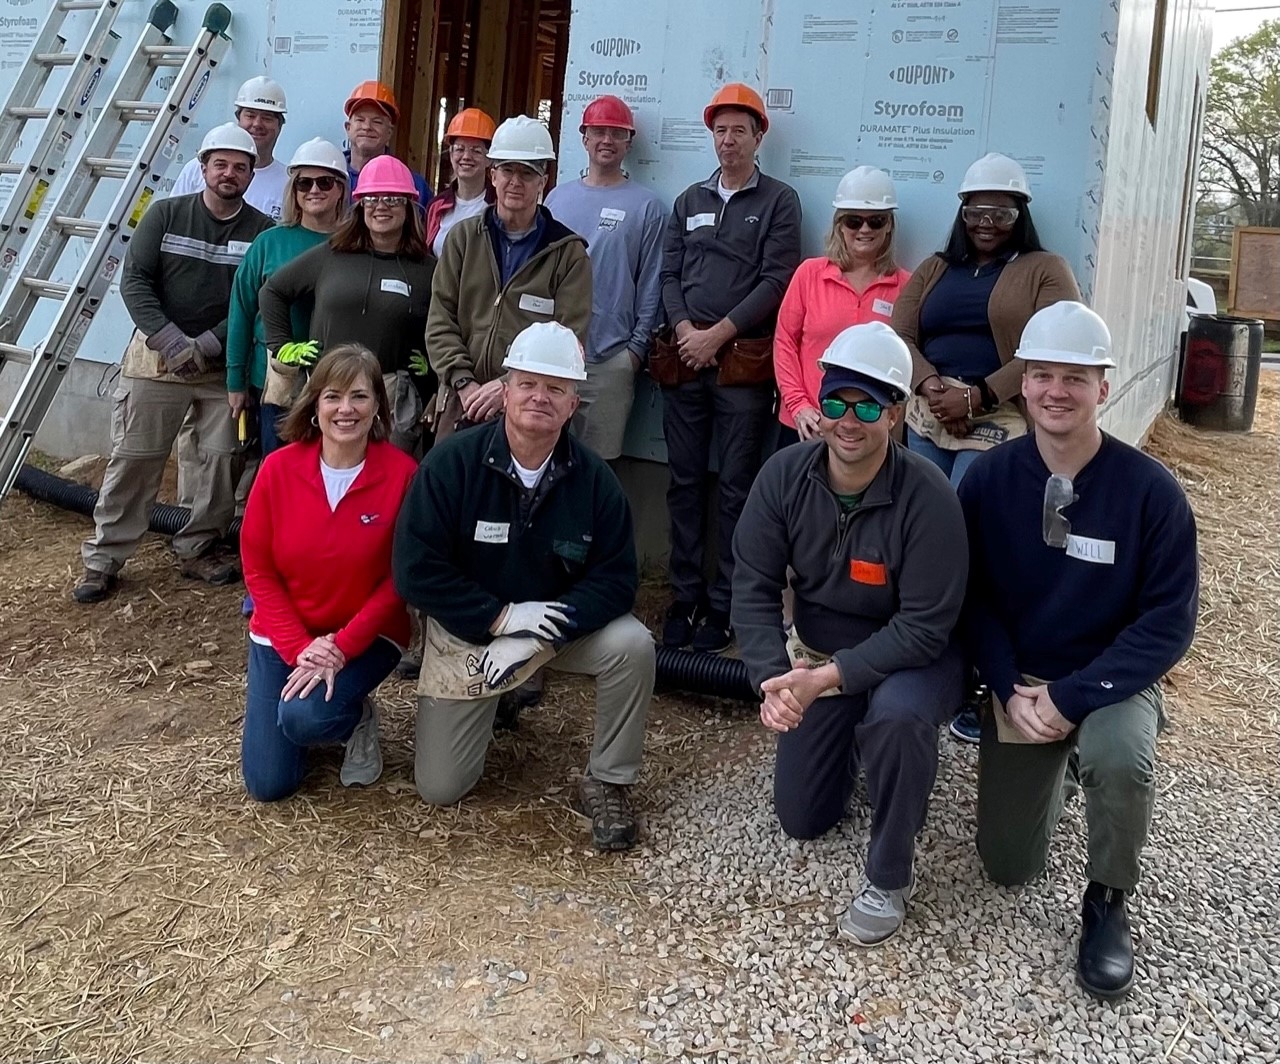 In North Carolina, Raleigh-Durham Region employees volunteered to help frame a home in the Northside community of Chapel Hill, NC.